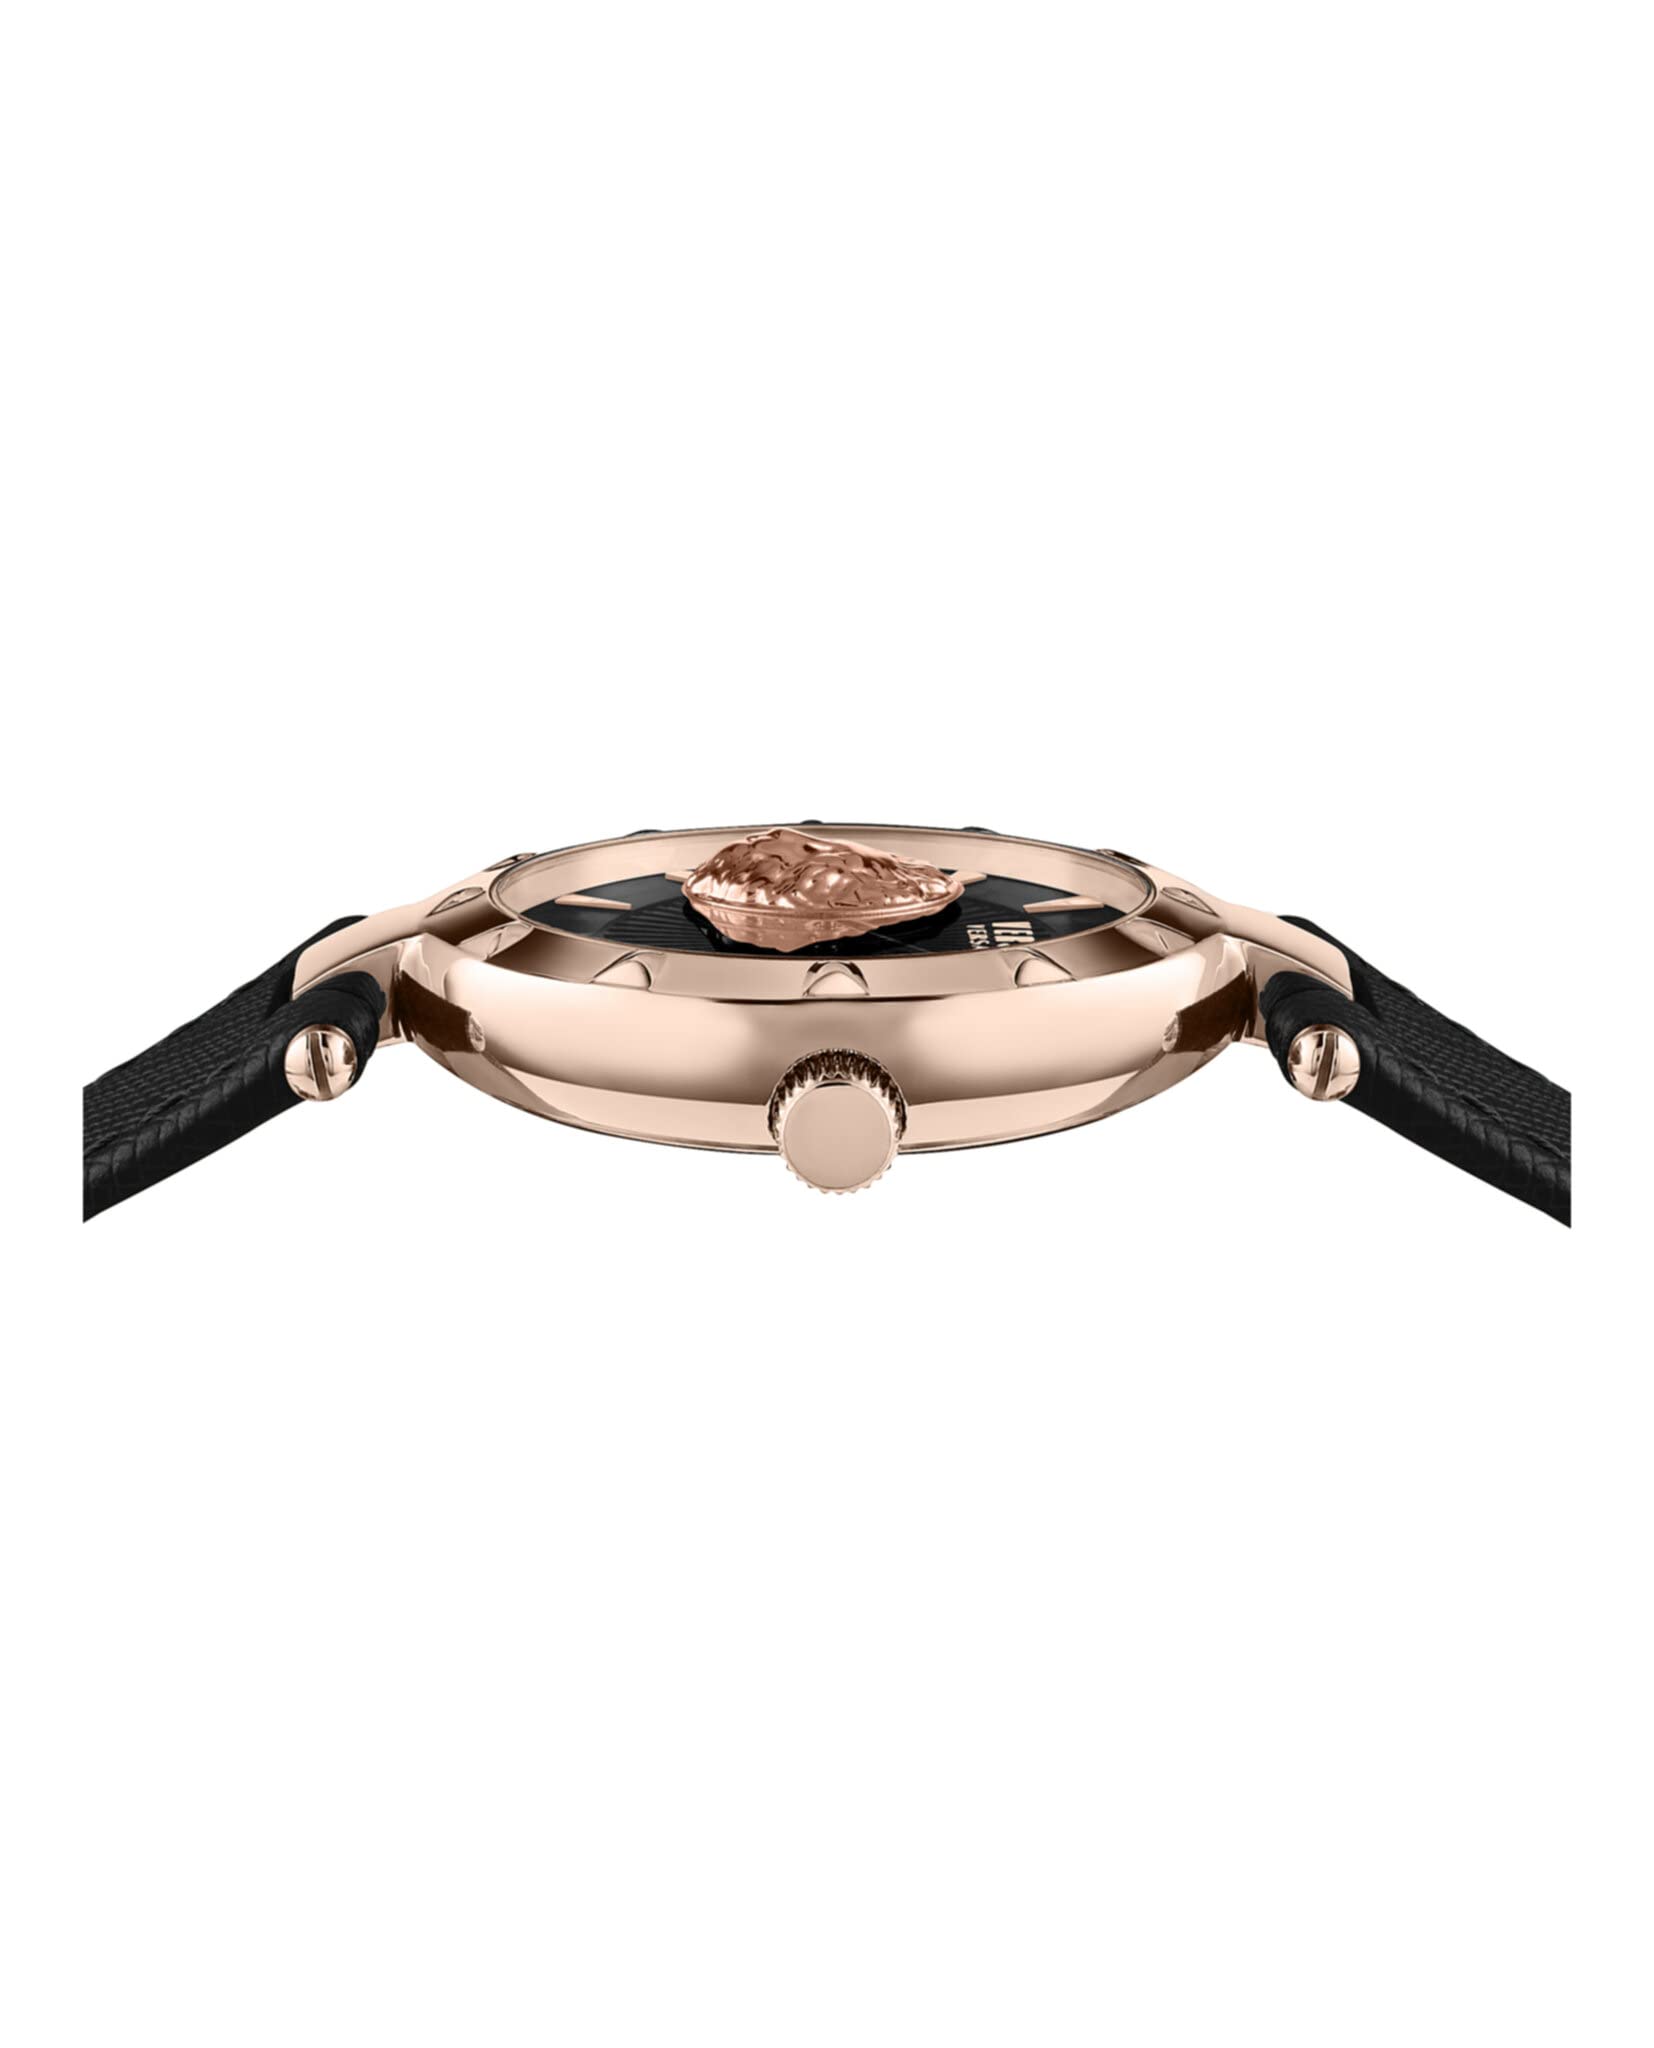 Versus Versace Sertie Collection Luxury Womens Watch Timepiece with a Black Strap Featuring a Rose Gold Case and Black Dial